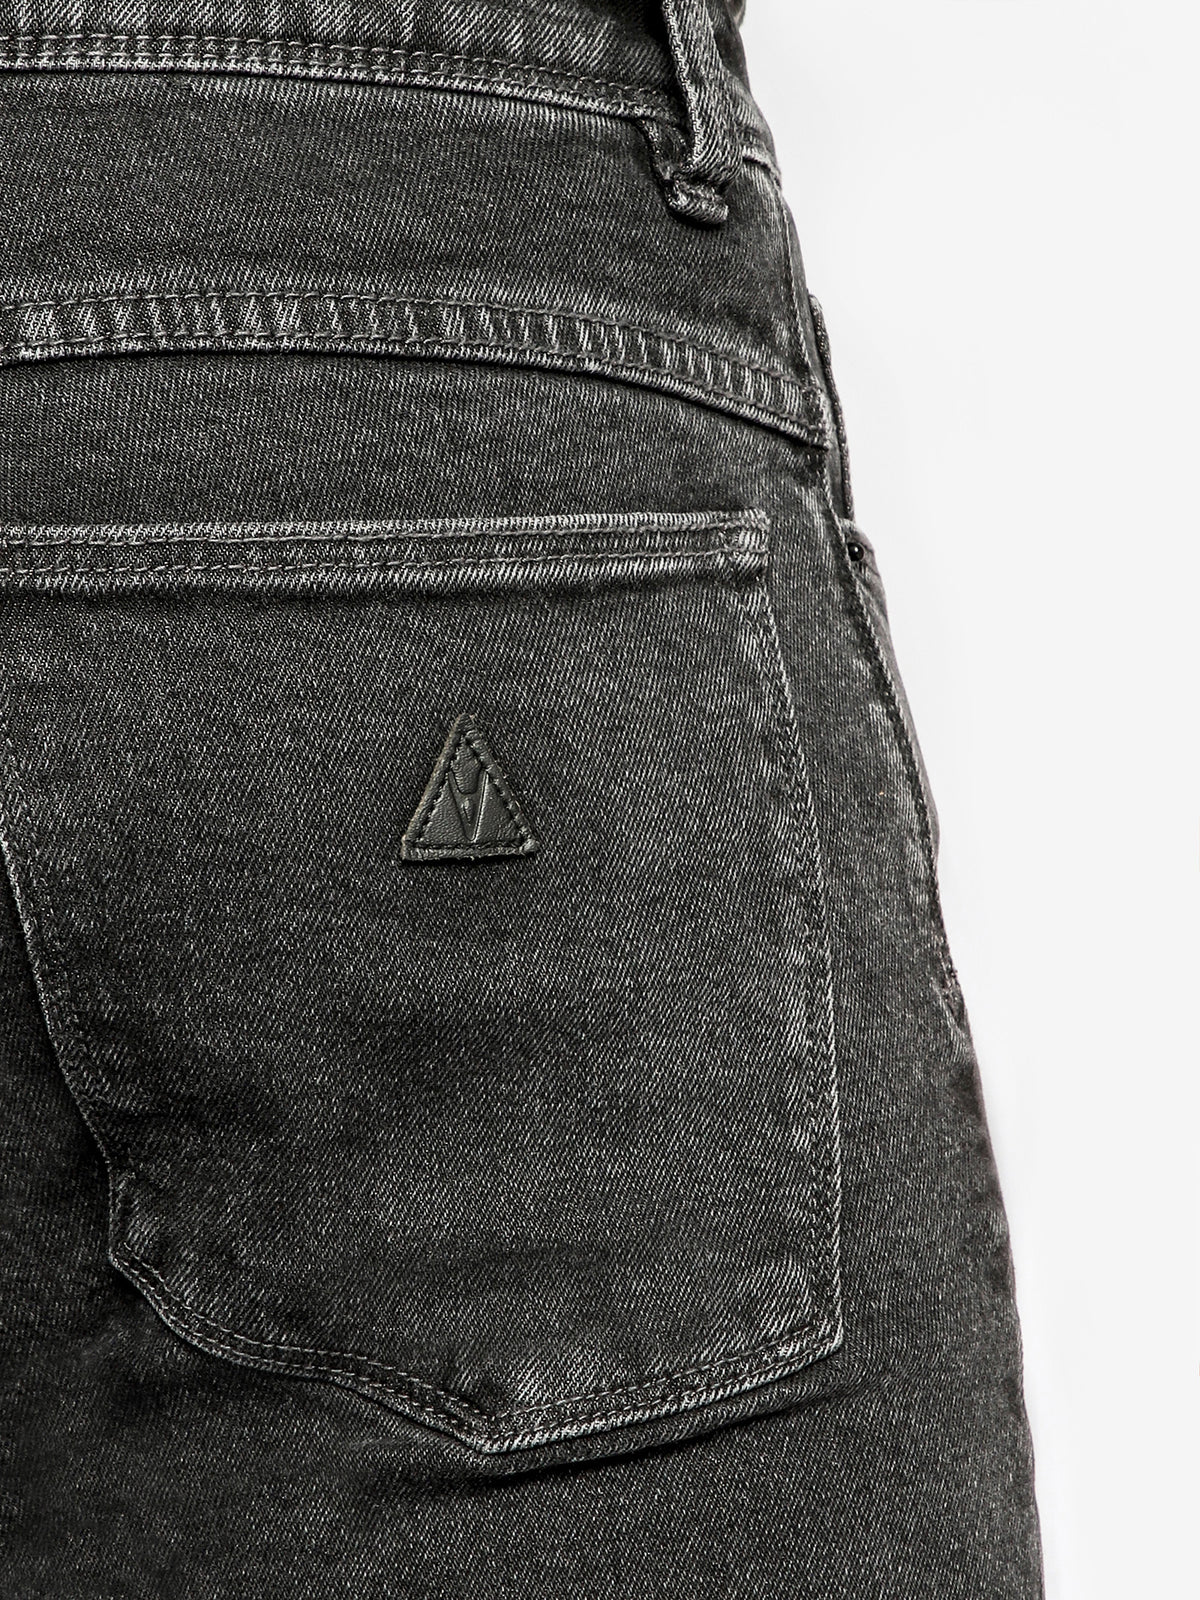 A Dropped Skinny Turn Up Jeans in Ghost Black Denim